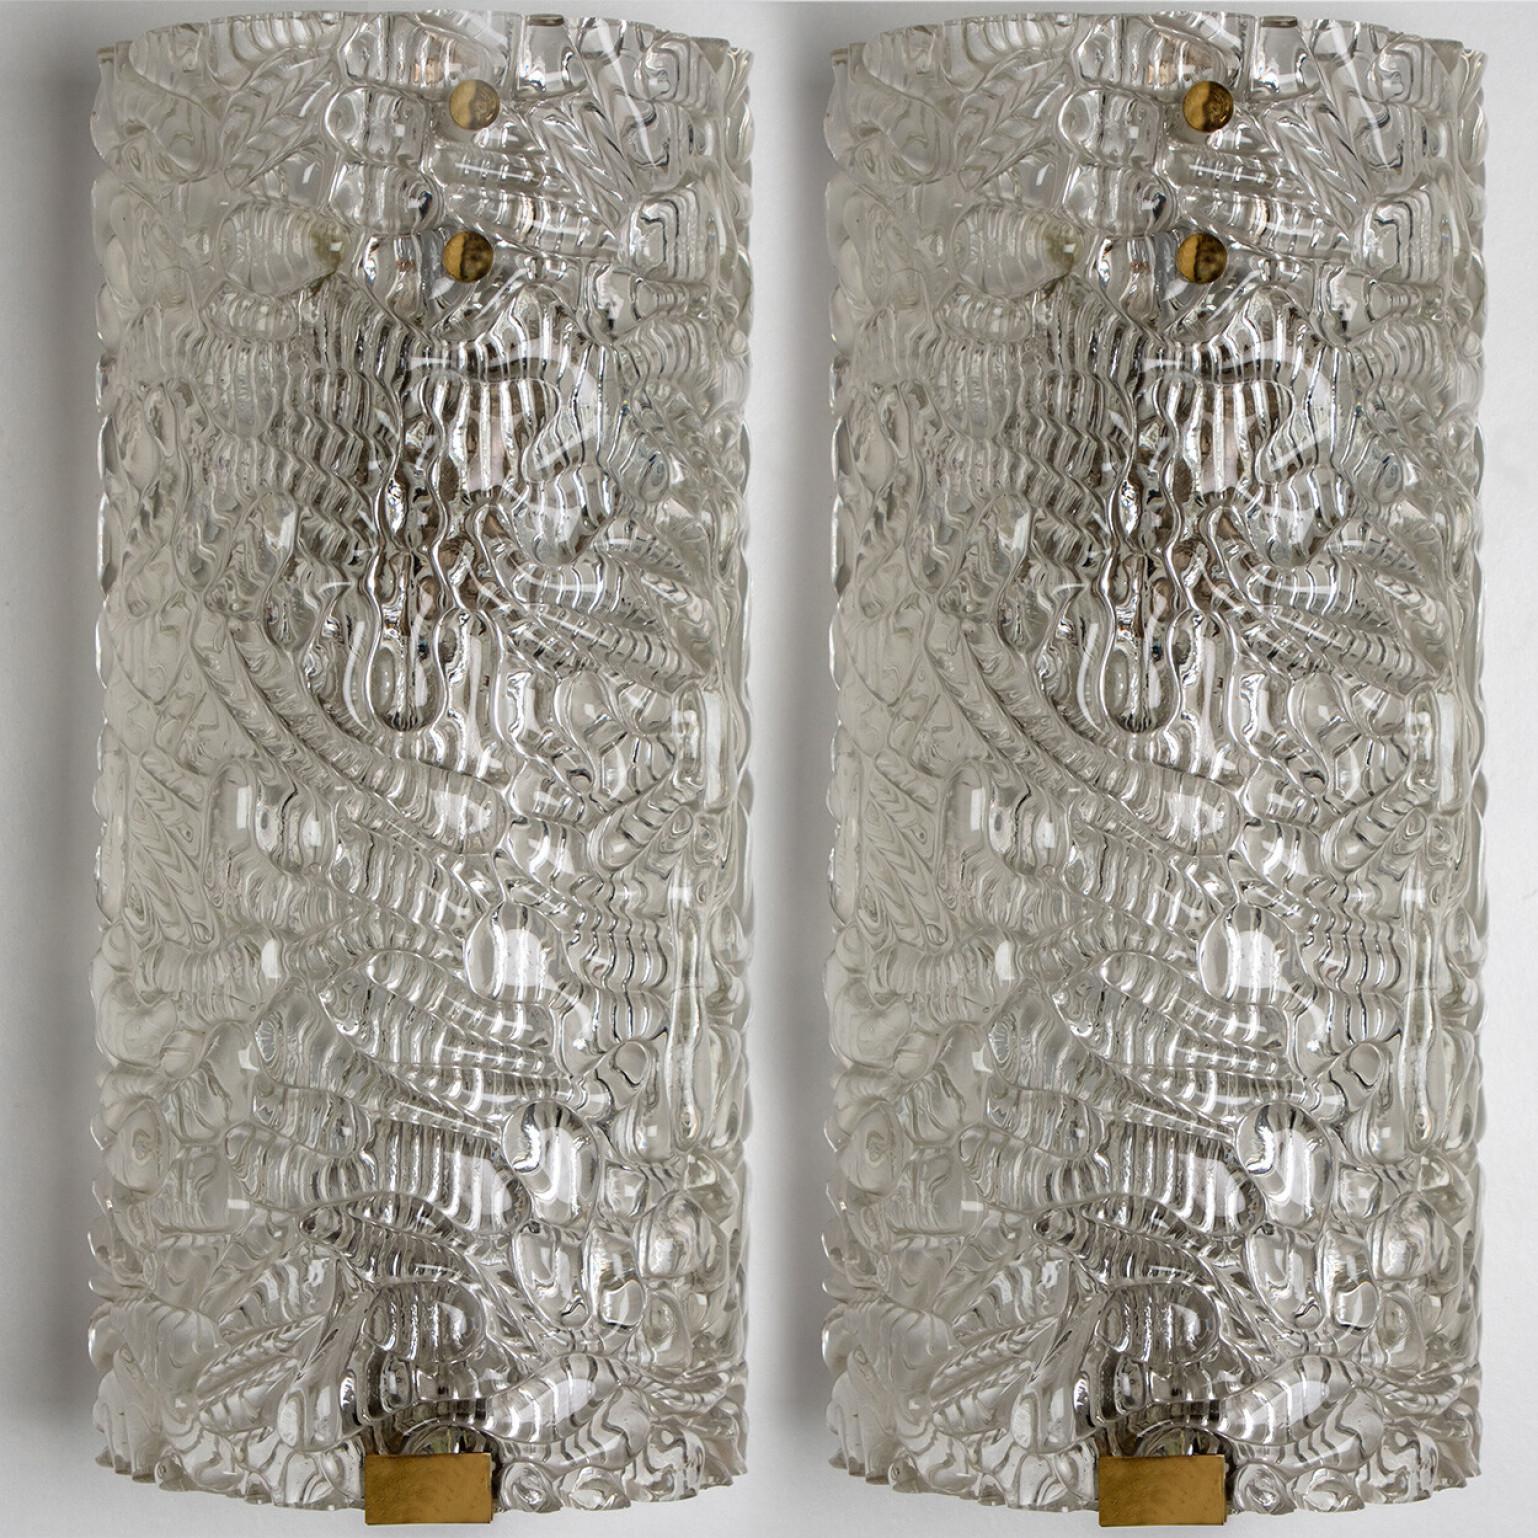 Mid-Century Modern A pair of Clear Bubbled Glass Wall Light Fixtures by Hillebrand, Germany, 1960s For Sale